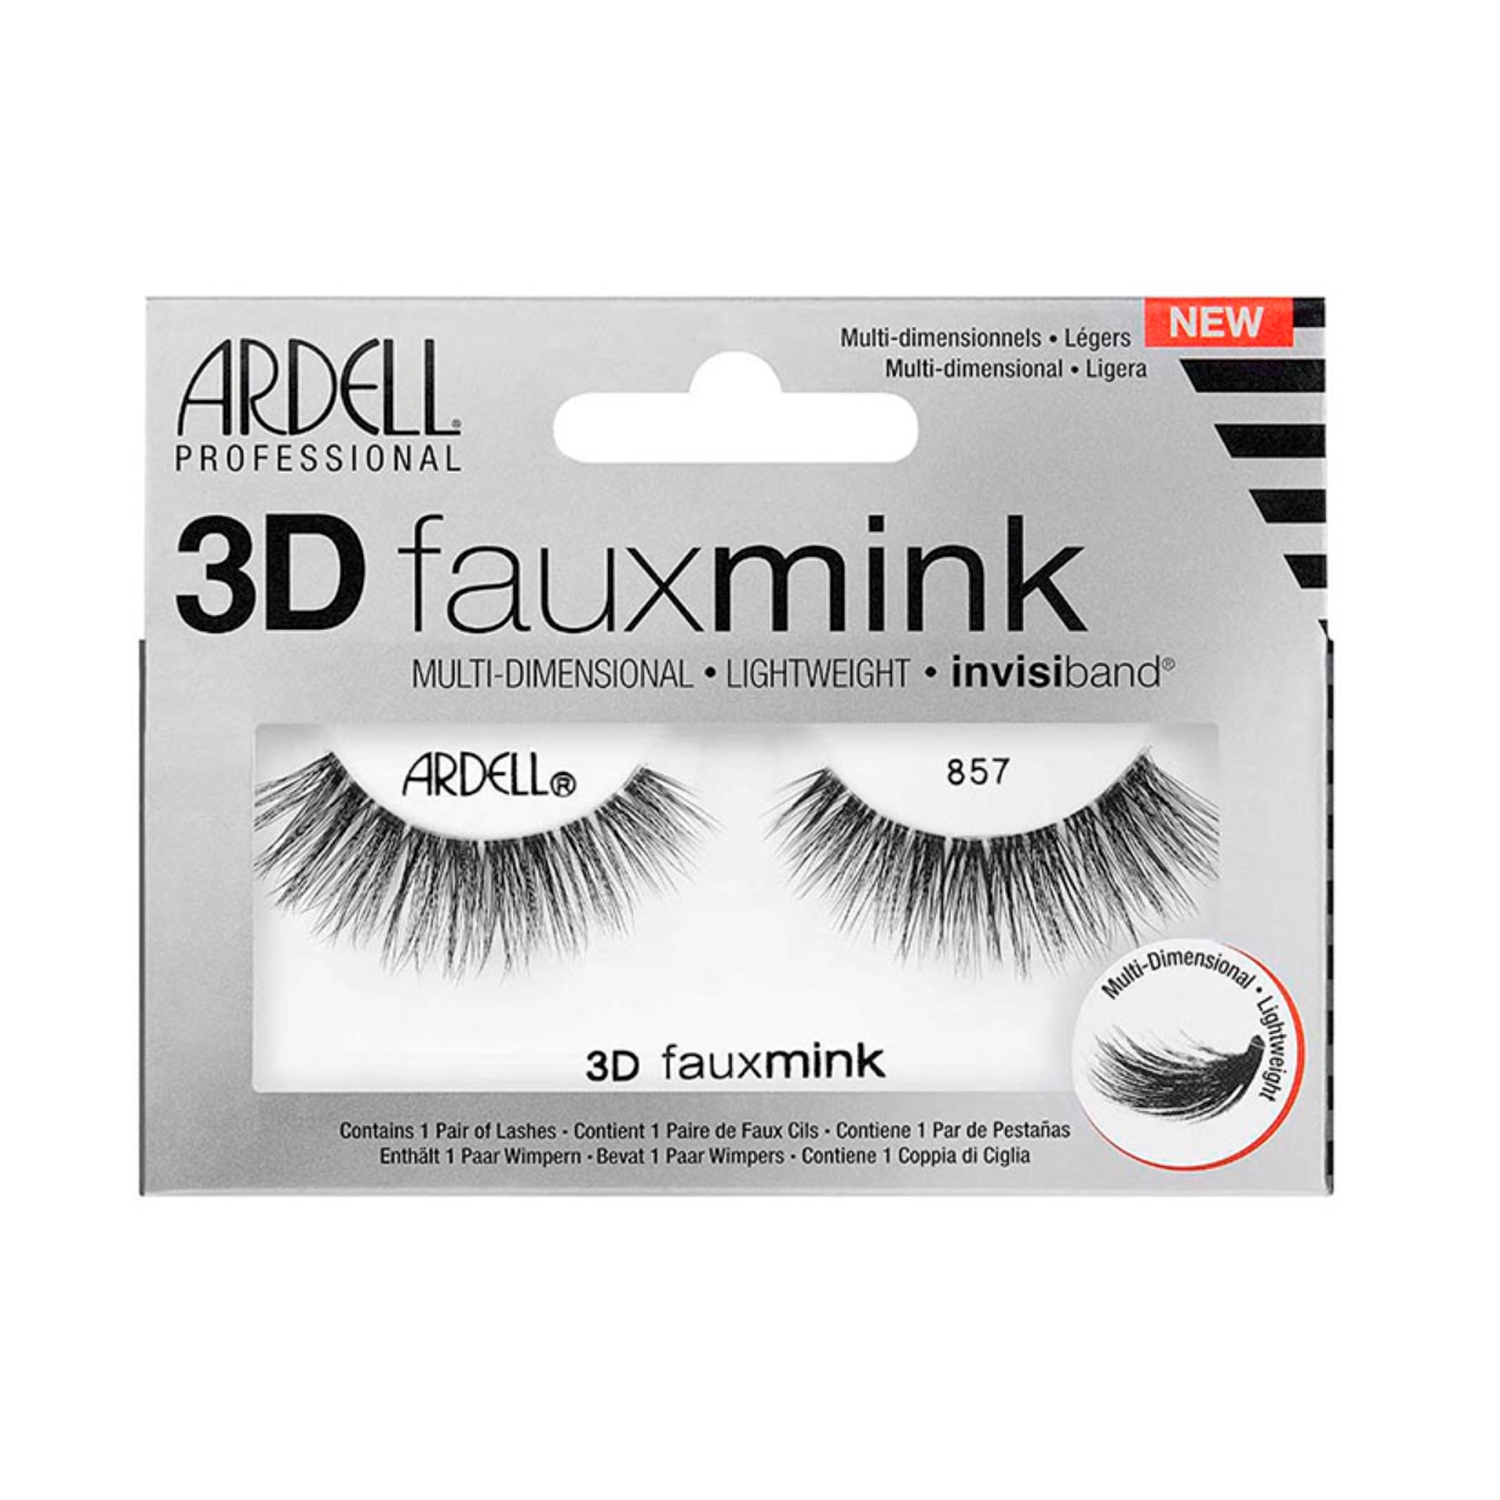 Ardell | Ardell 3D Faux Mink Eyelashes 857 Black - 67453 (1 Pair)